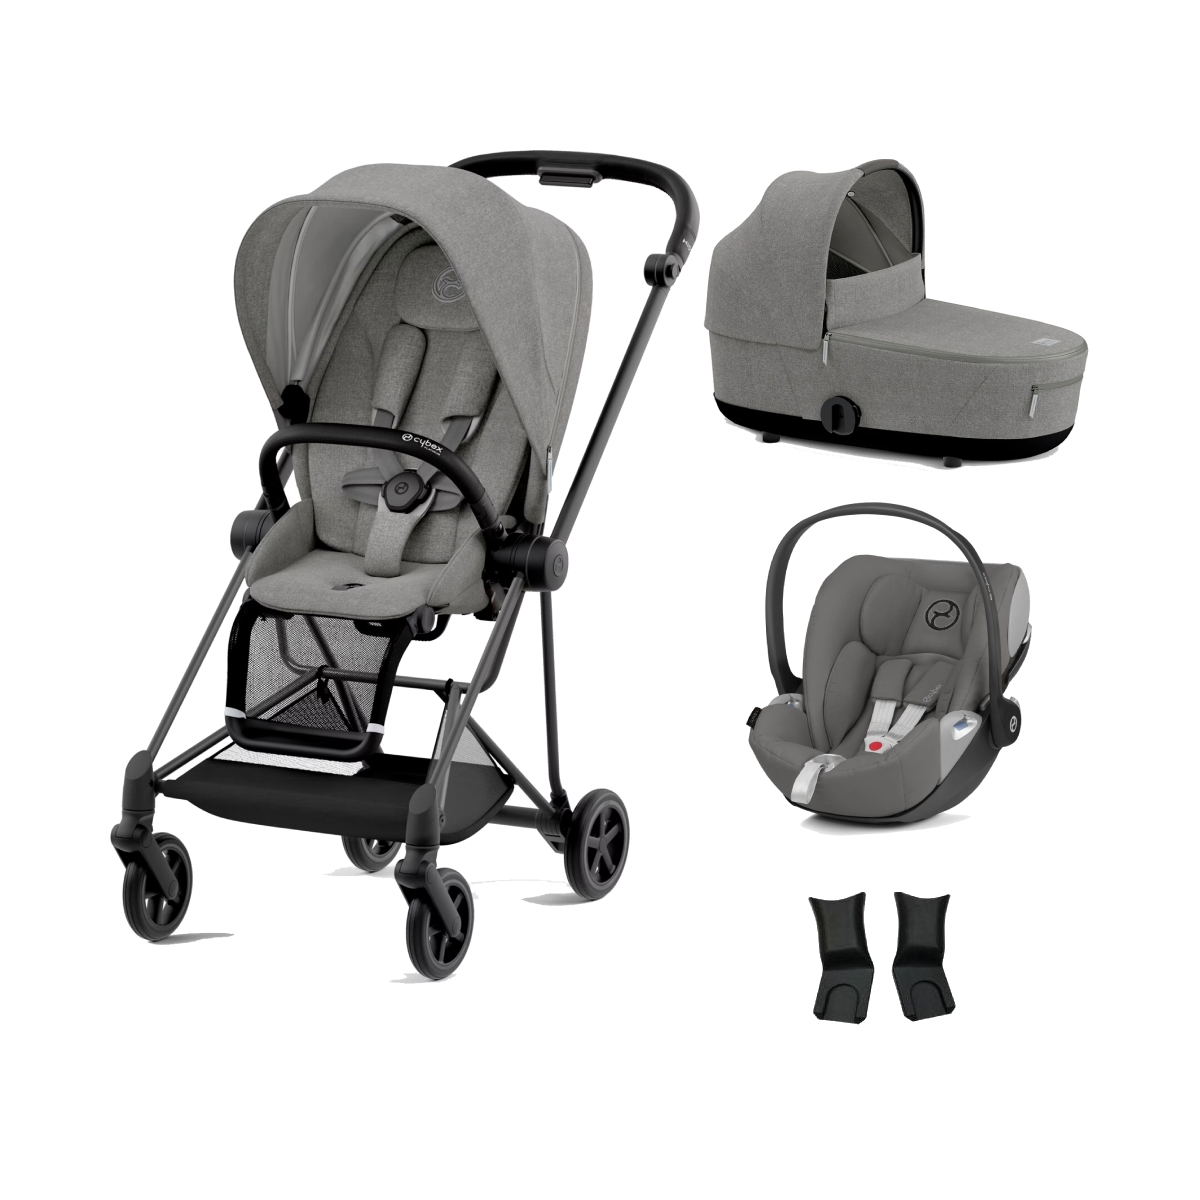 Cybex Mios Black Pushchair with Lux Carry Cot & Cloud Z Car Seat